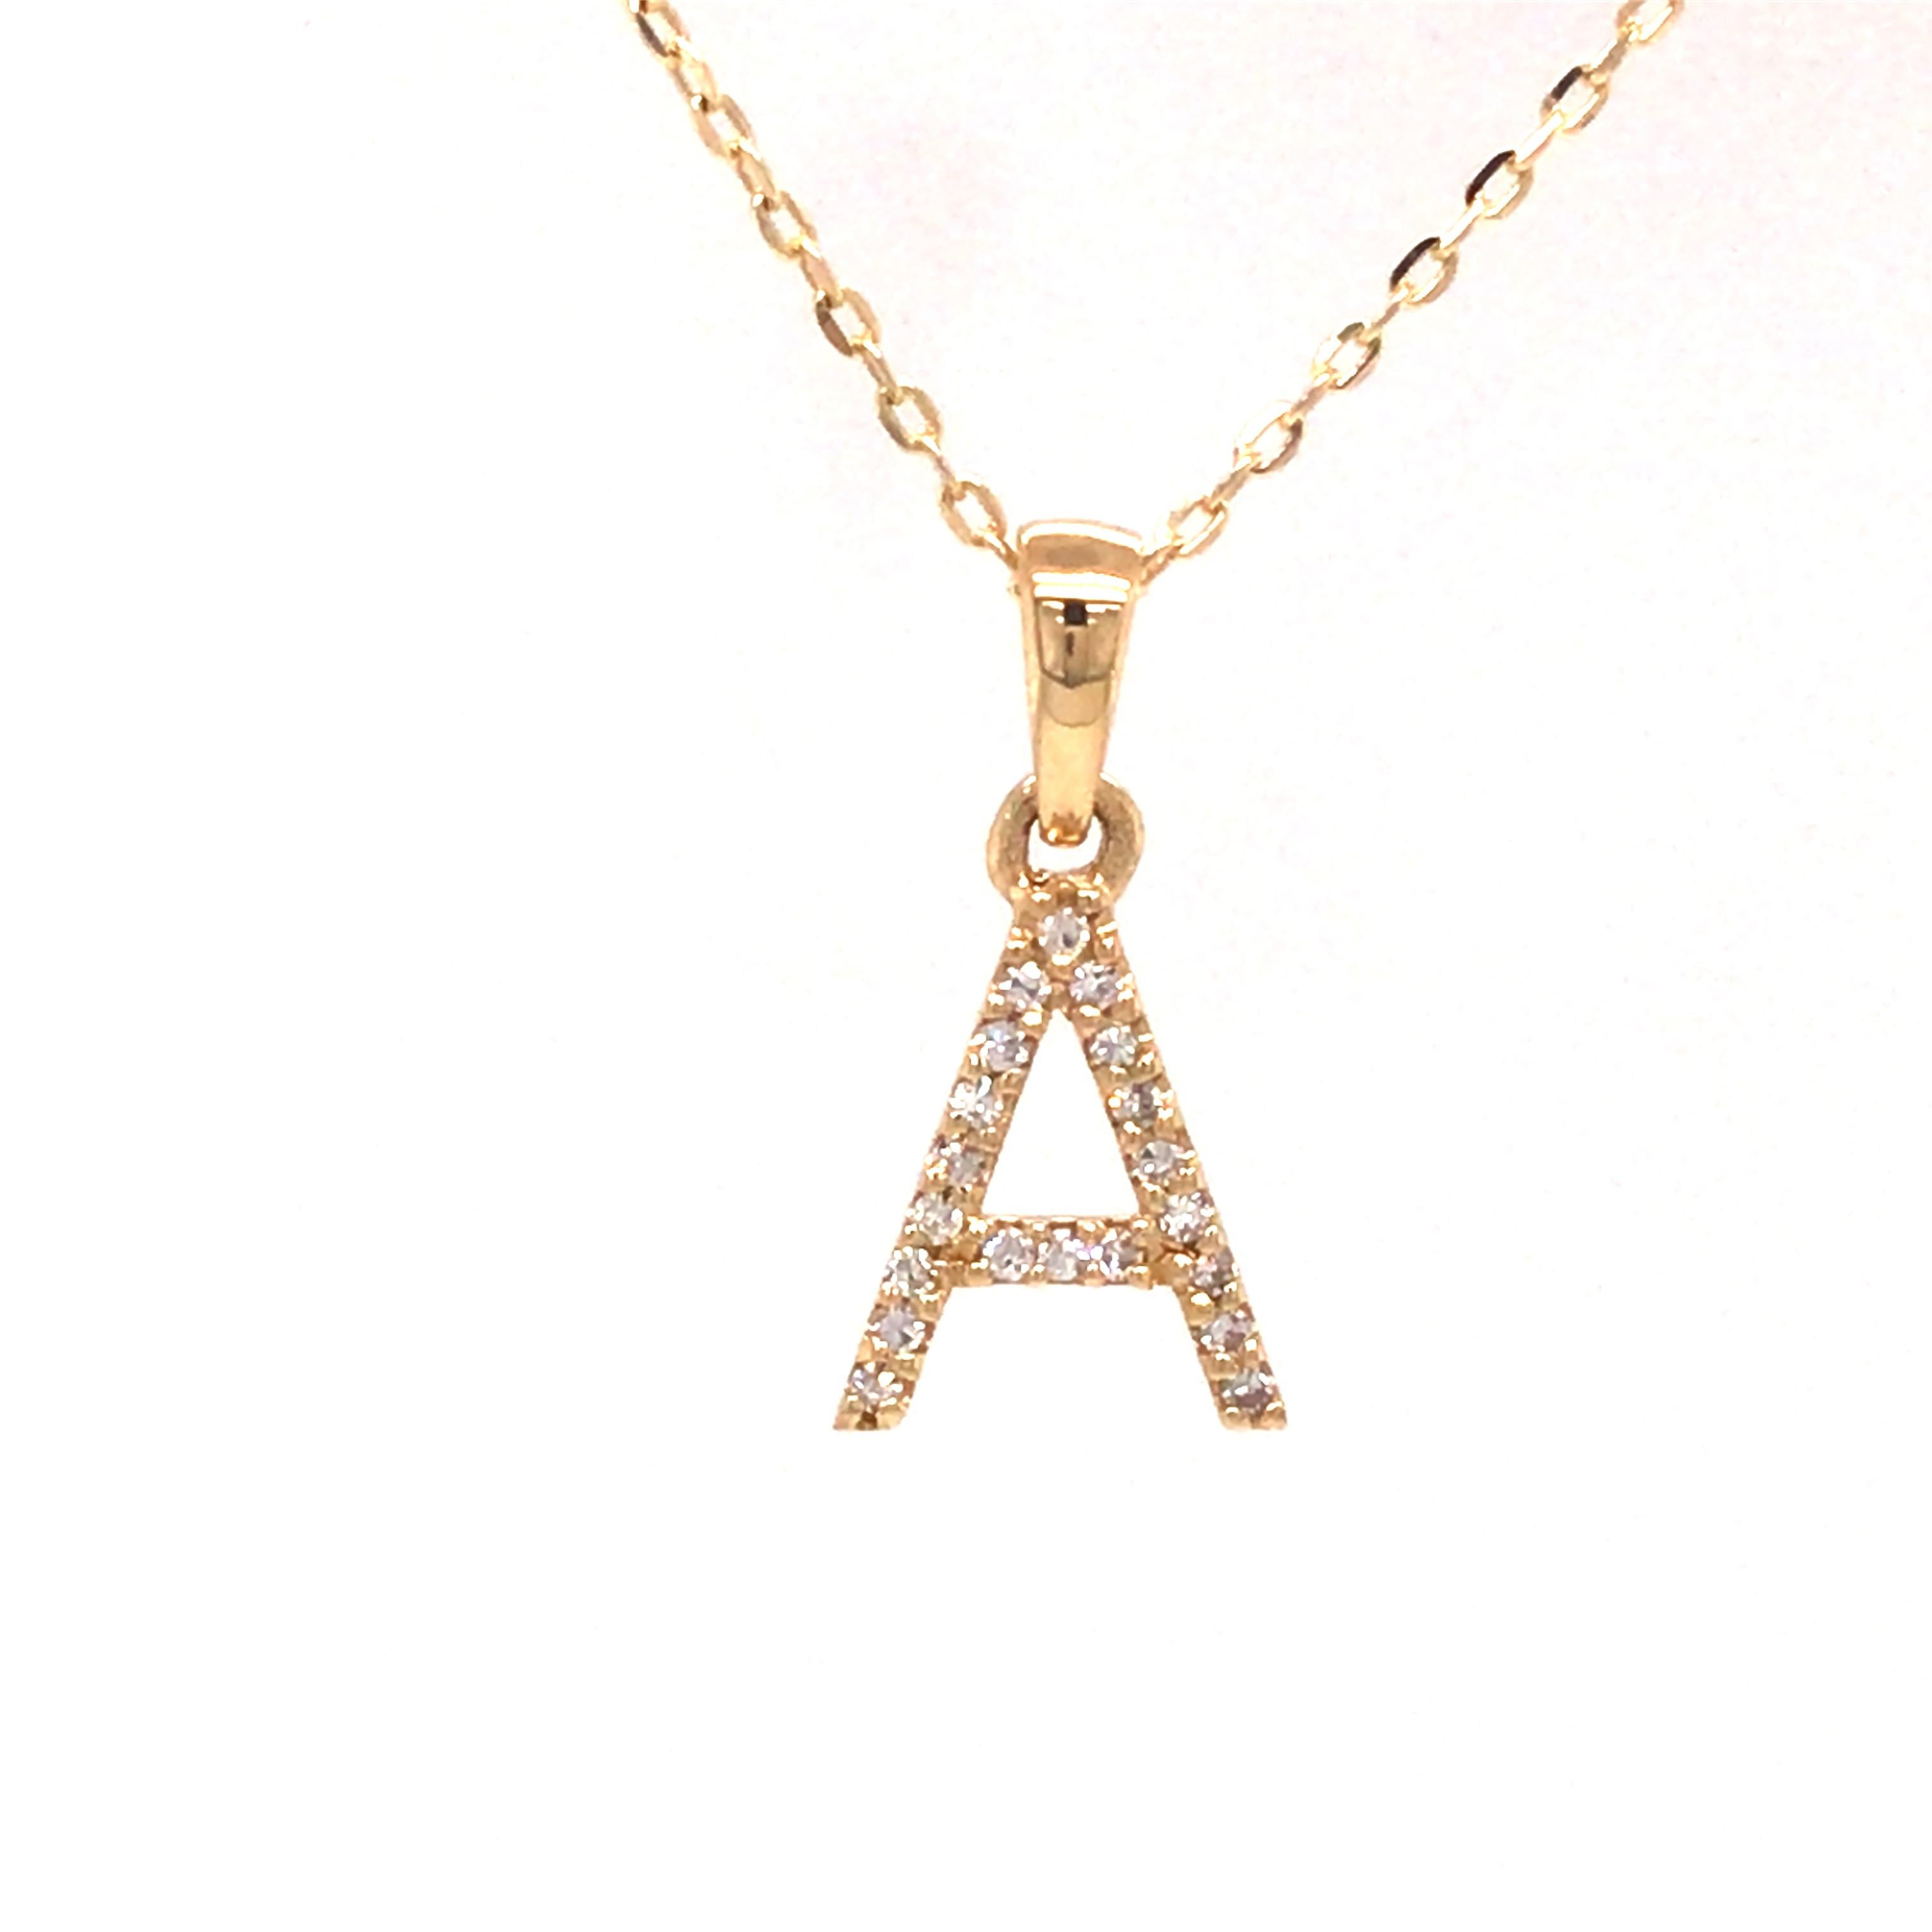 Diamond Letter 'A' Necklace in 14K Yellow Gold. Round Brilliant Cut Diamonds weighing 0.06 carat total weight, G-H in color and VS-SI in clarity are expertly set.  The Necklace measures 16 inch in length and the pendant measures 1/2 inch in length. 